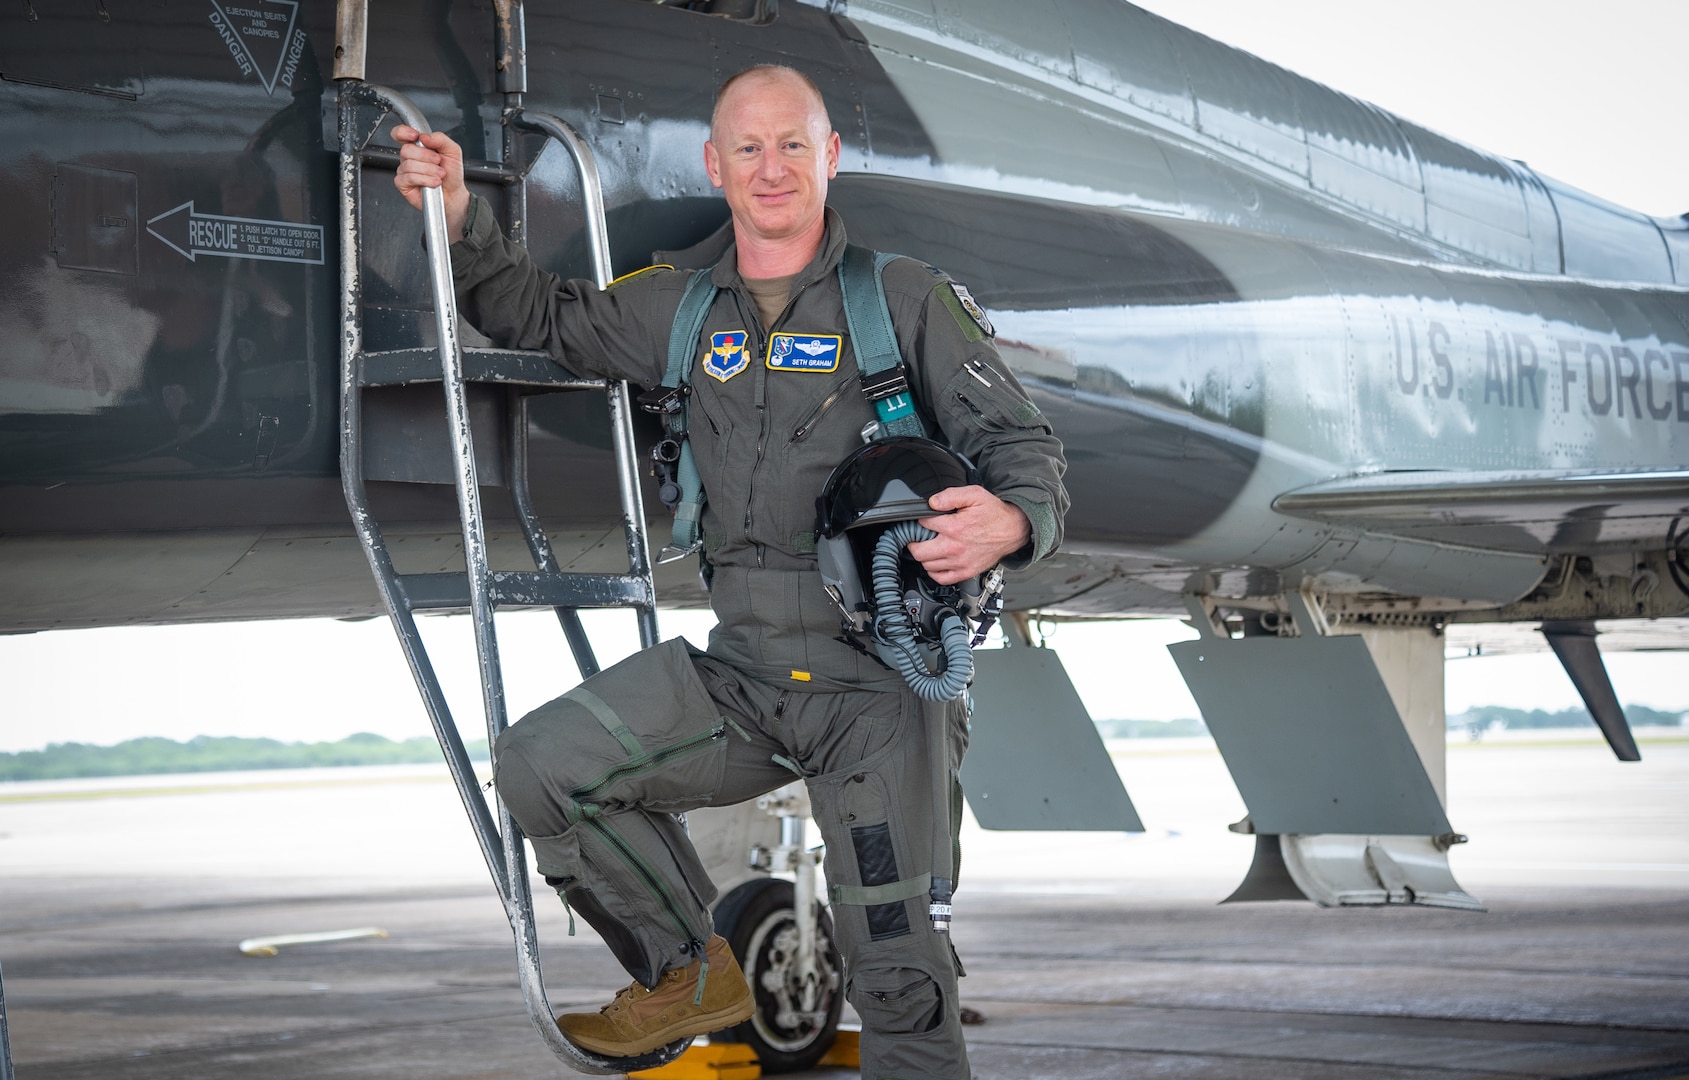 Col. Seth Graham, 14th Flying Training Wing commander, poses with a T-38 Talon before takeoff at Joint Base San Antonio-Randolph. Col. Graham is currently attending Pilot Instructor Training with the 560th Flying Training Squadron at JBSA-Randolph. (U.S. Air Force photo by Benjamin Faske)